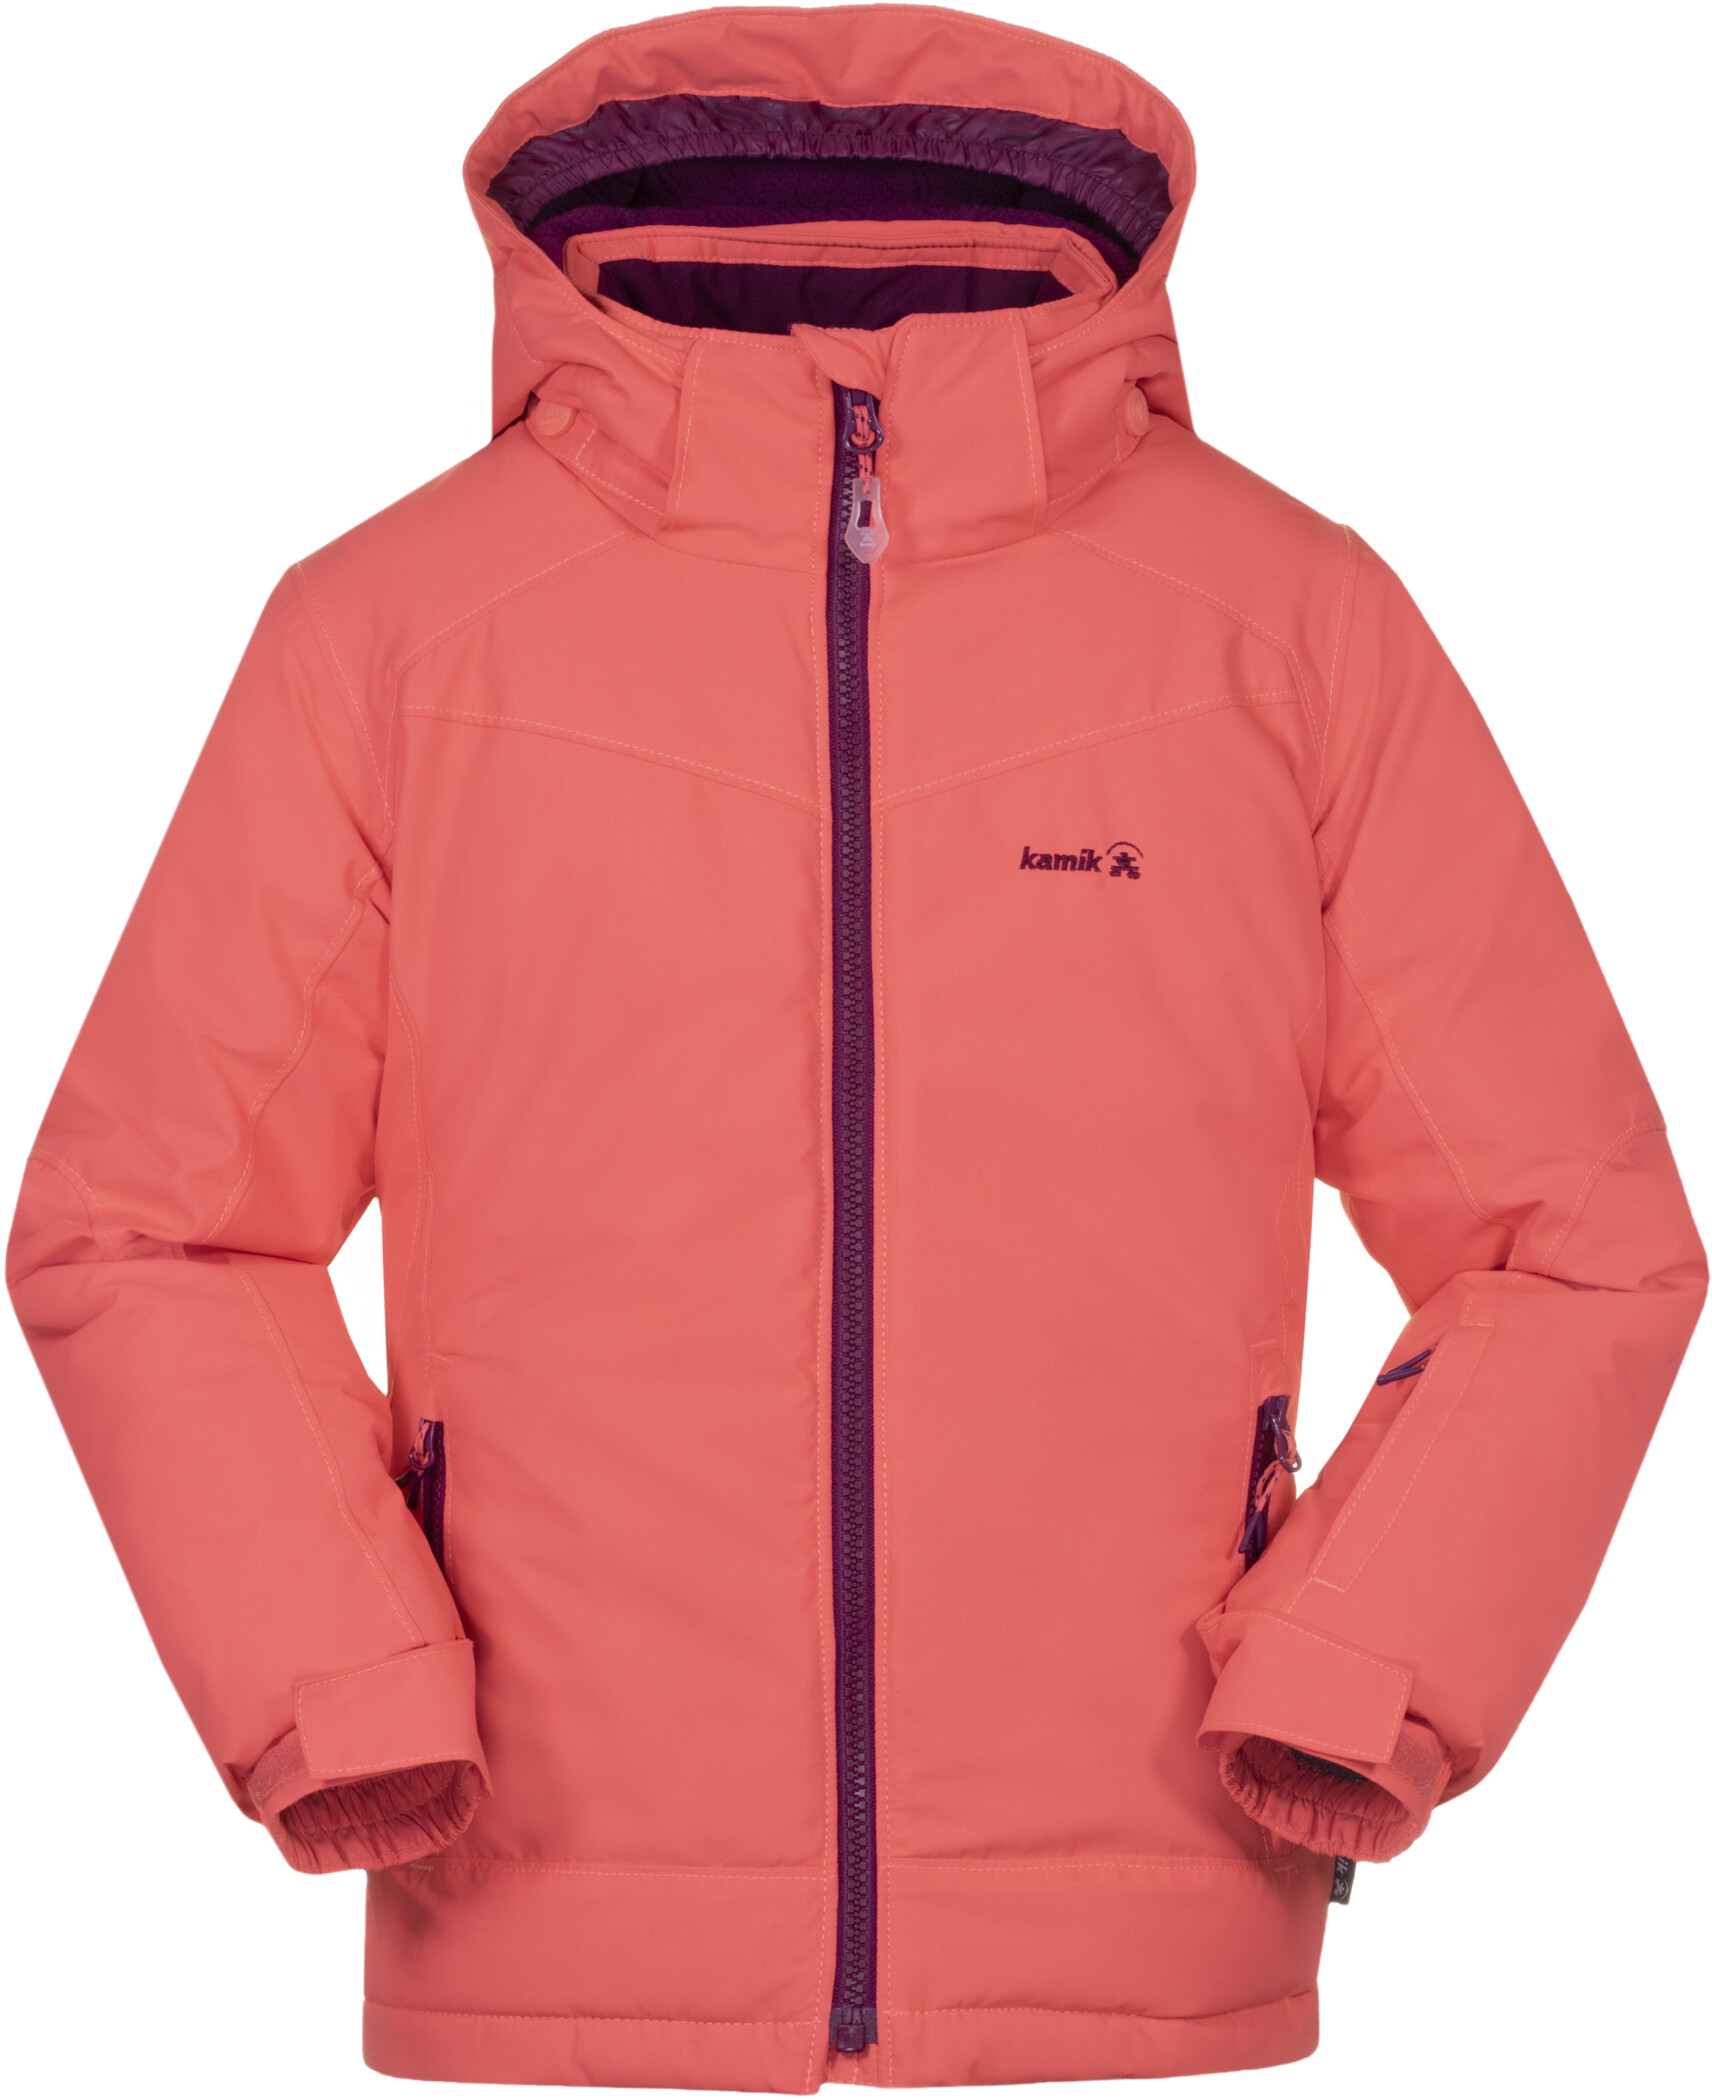 Coral Red Steppjacke Unlimited